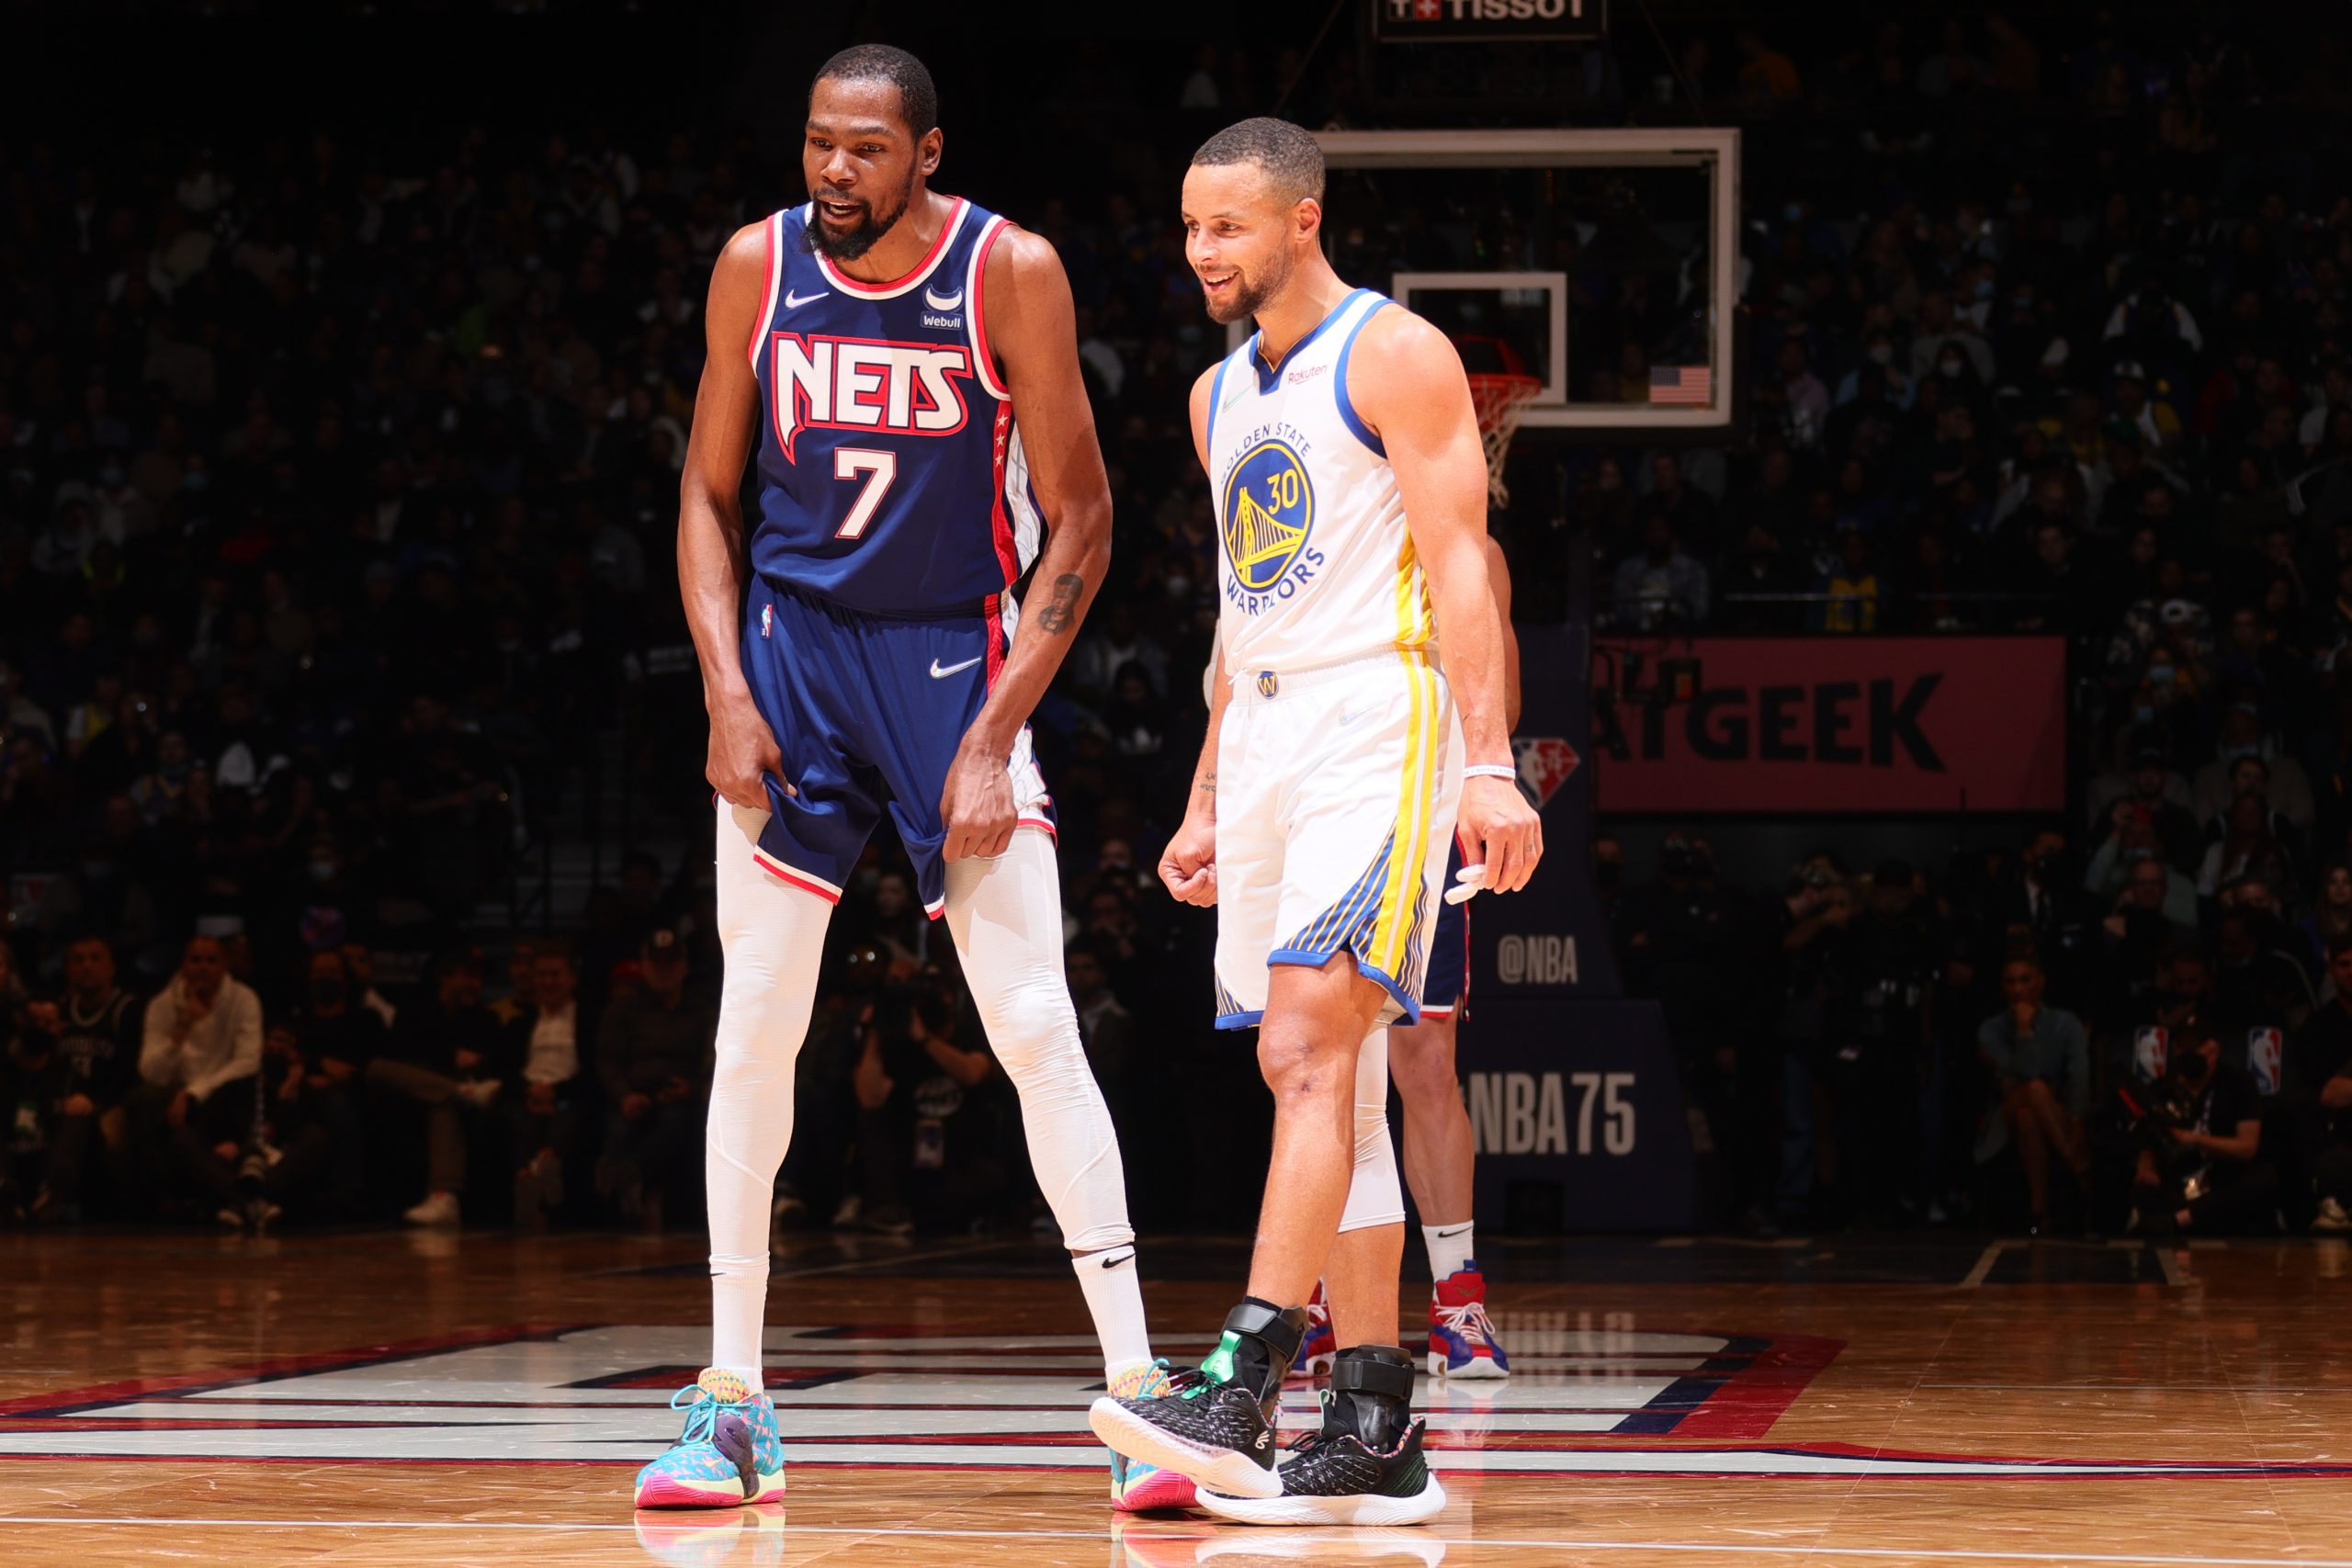 Durant and Curry Lead Western Conference in First Fan Returns of